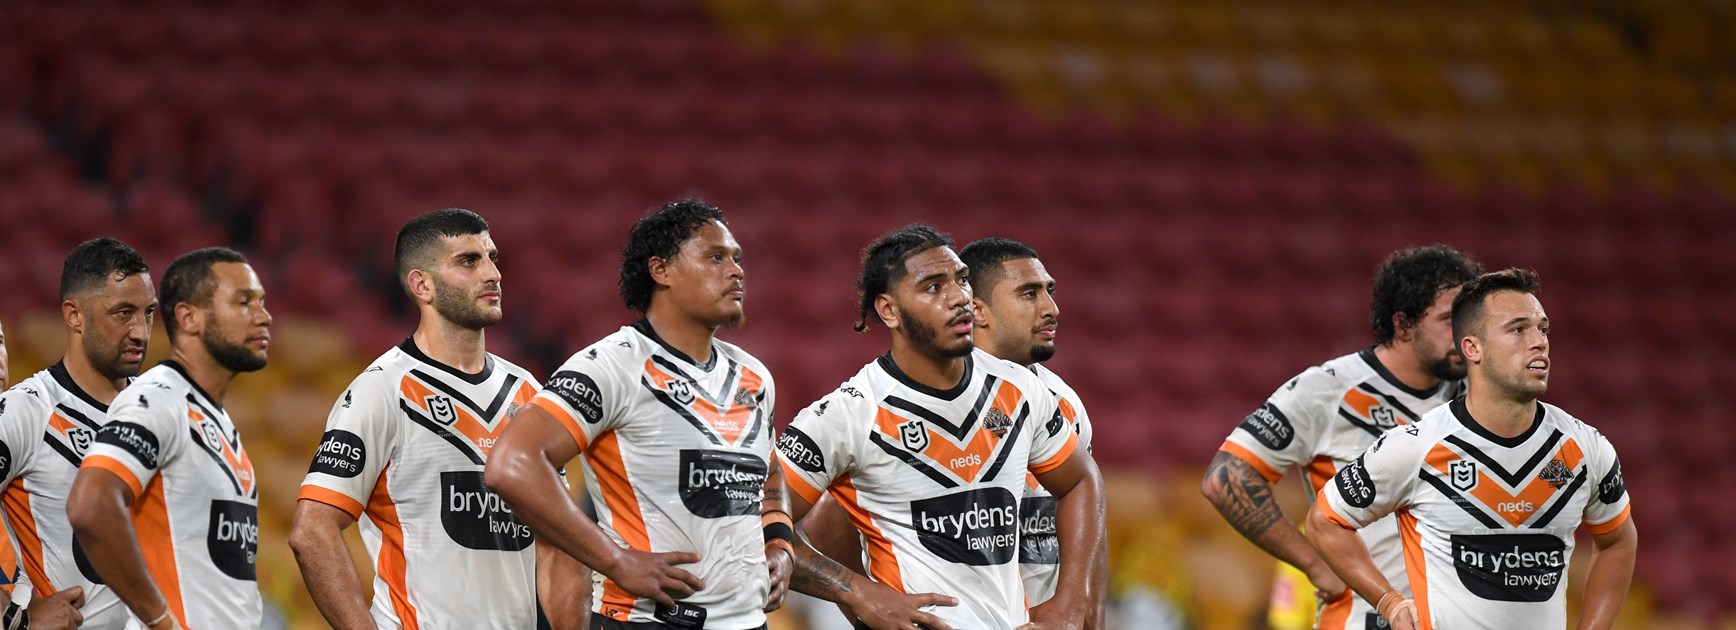 The opposition: Tigers name squad